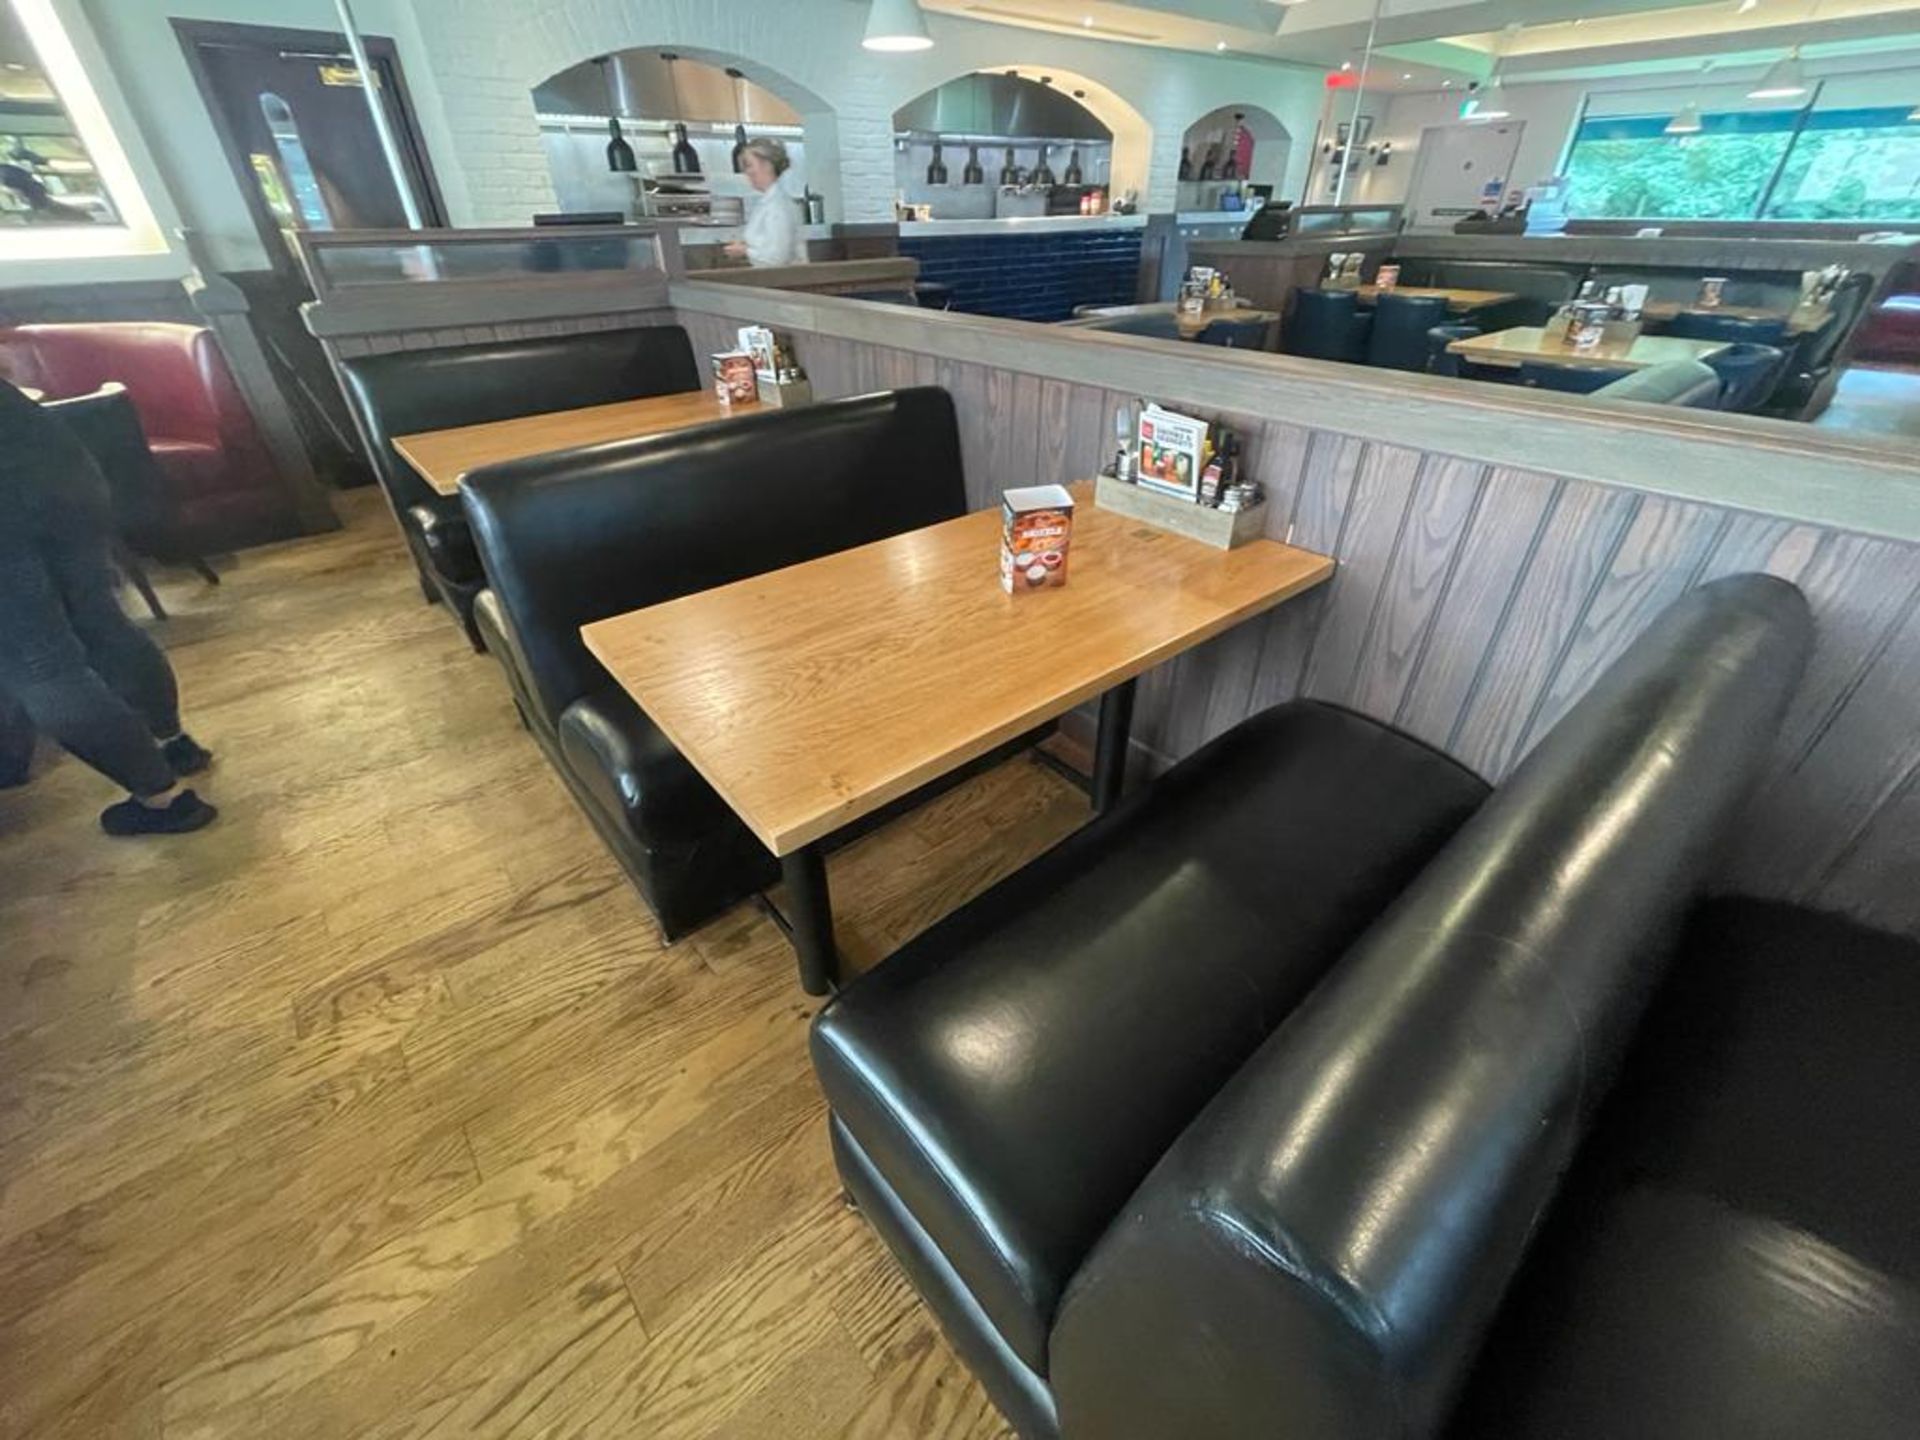 1 x Collection of Restaurant Booth Seating in a Black Faux Leather Upholstery - Image 14 of 16